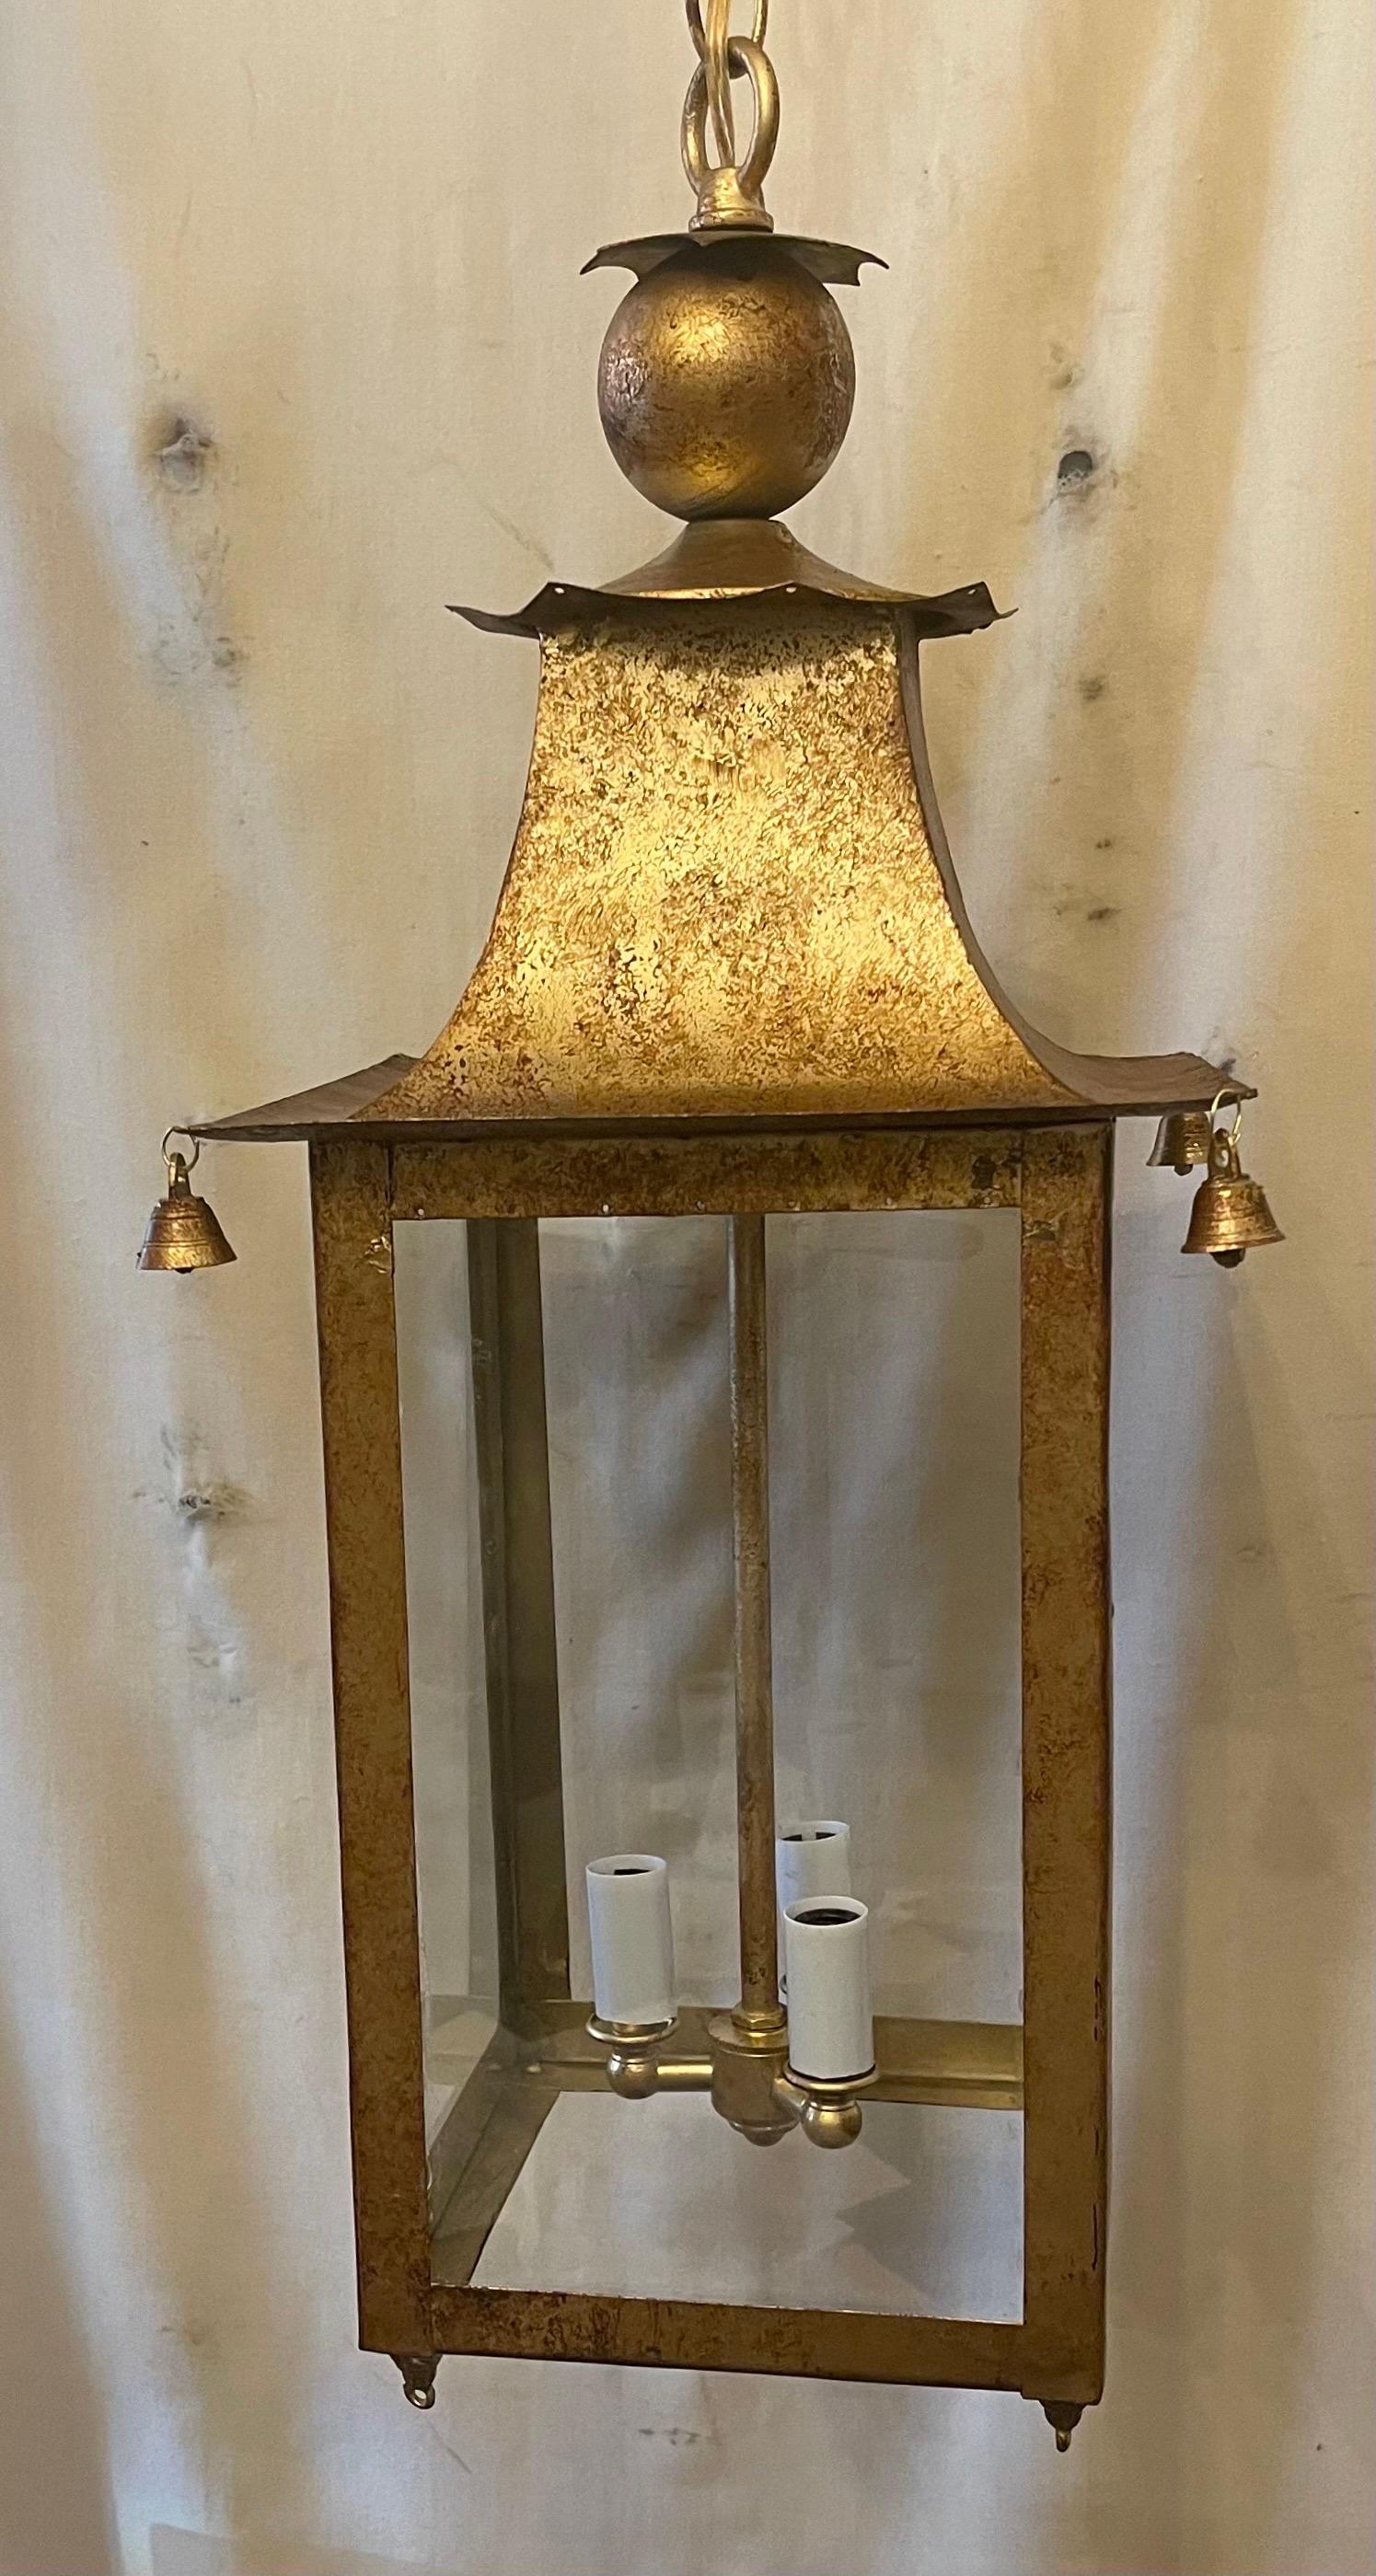 A Wonderful Pair Of Chinoiserie Gold Gilt Pagoda lantern chandeliers With 3 Candelabra Lights Completely Rewired With Bells On Each Corner, These Fixtures Come With Chain Canopy And Mounting Hardware For Installation.